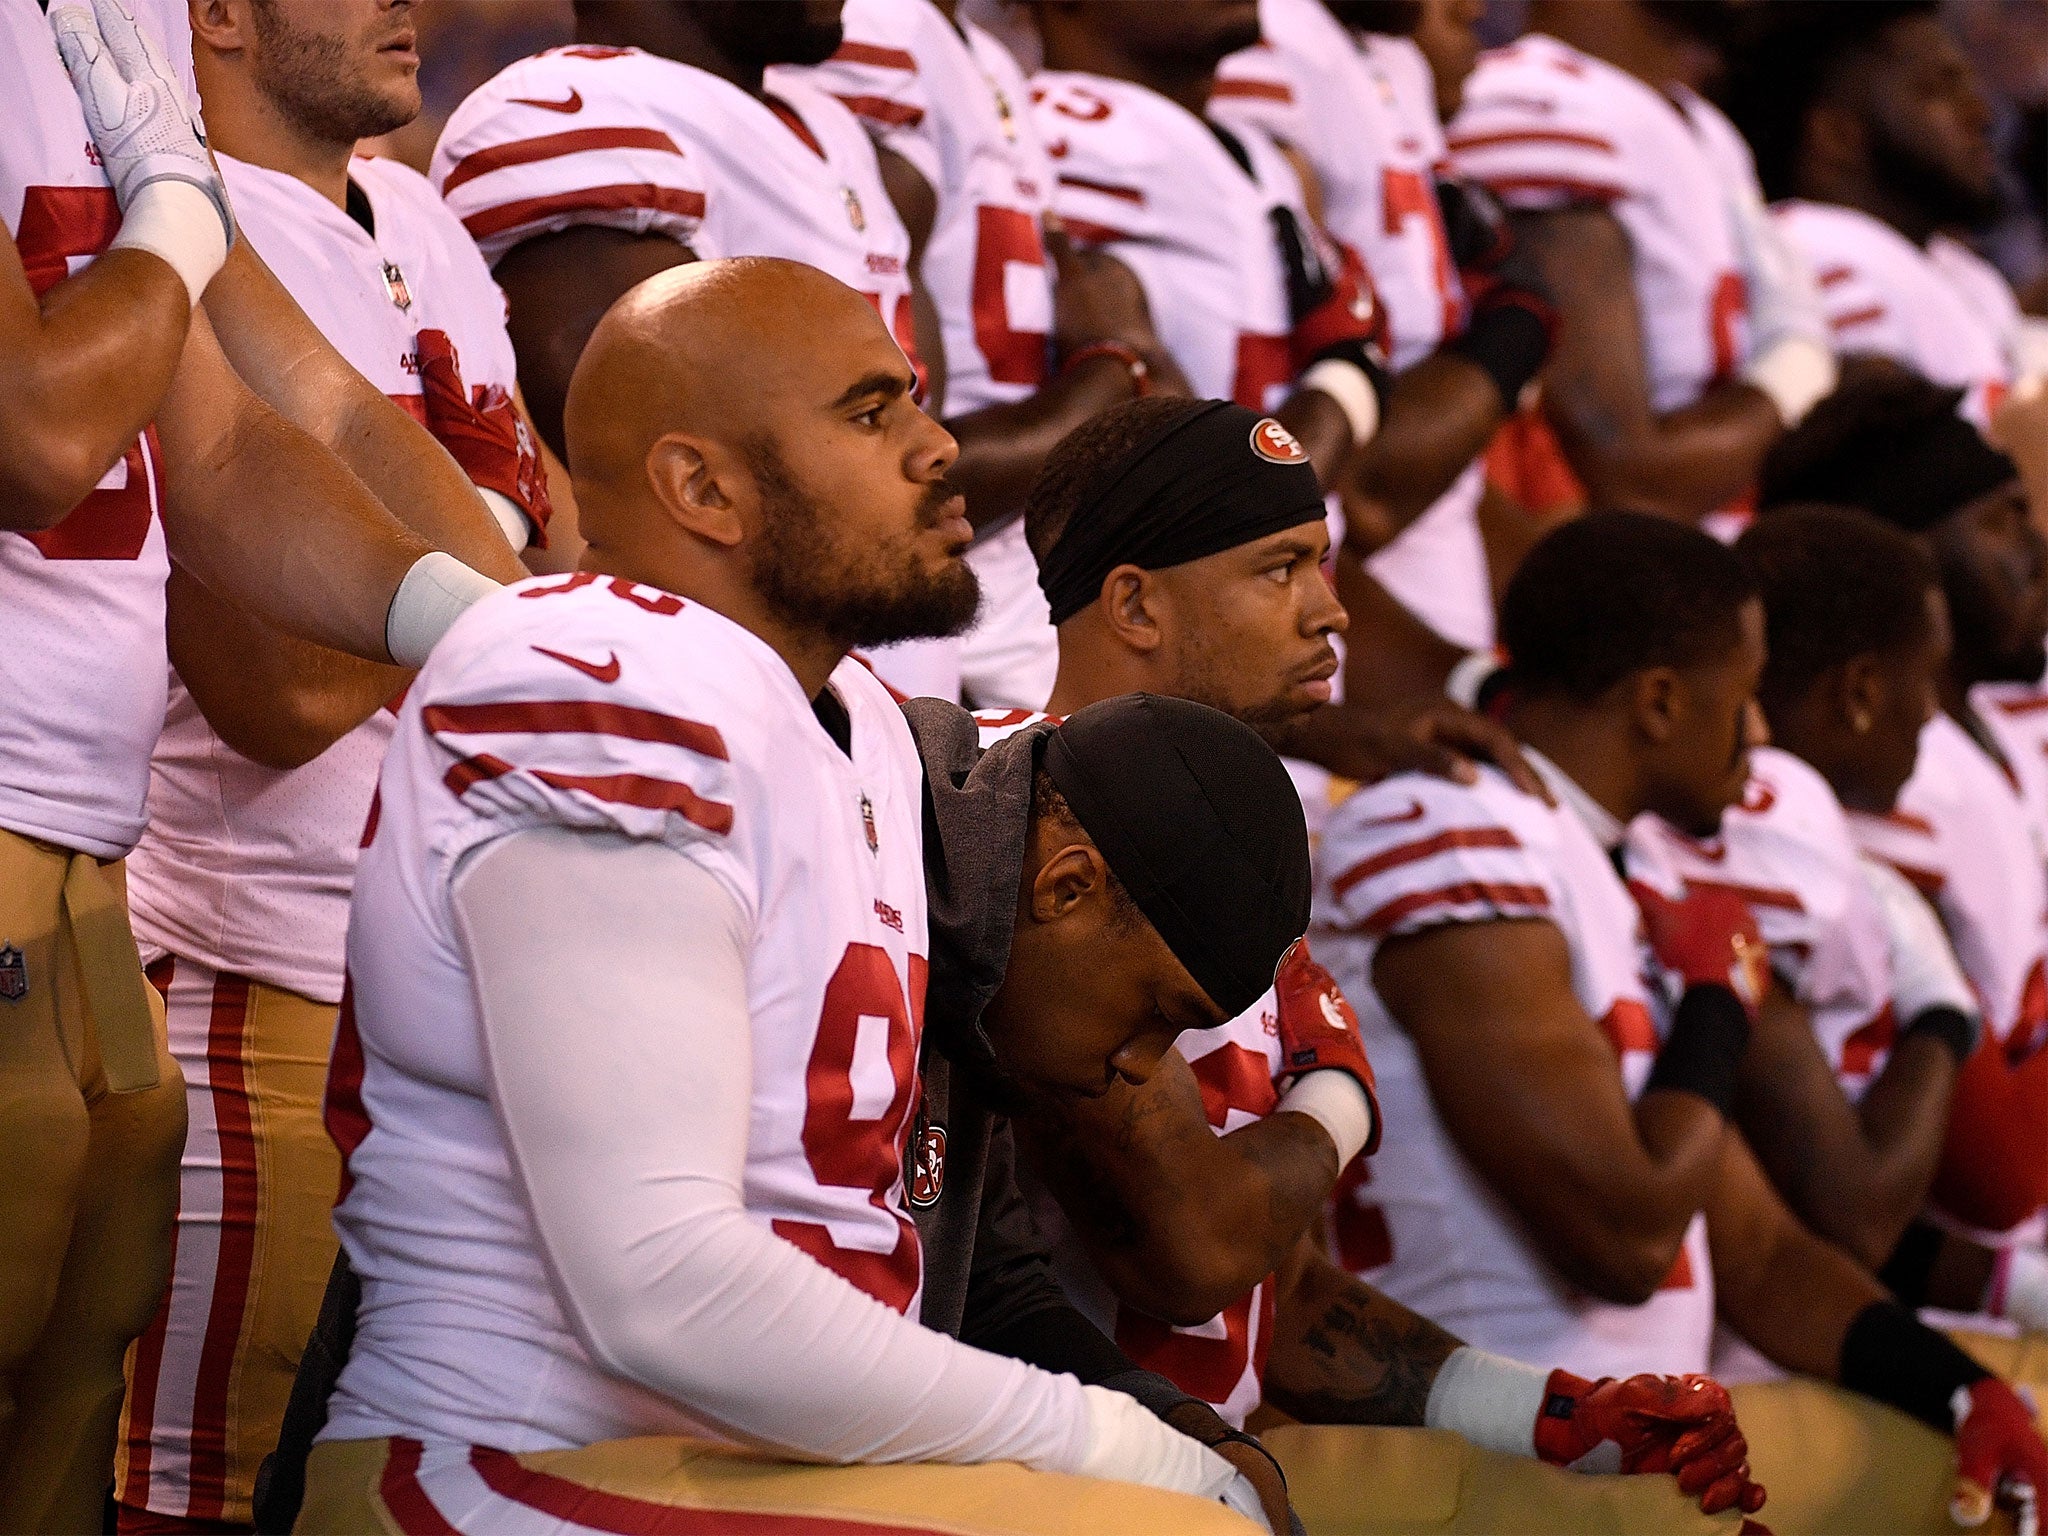 NFL players kneel during the national anthem